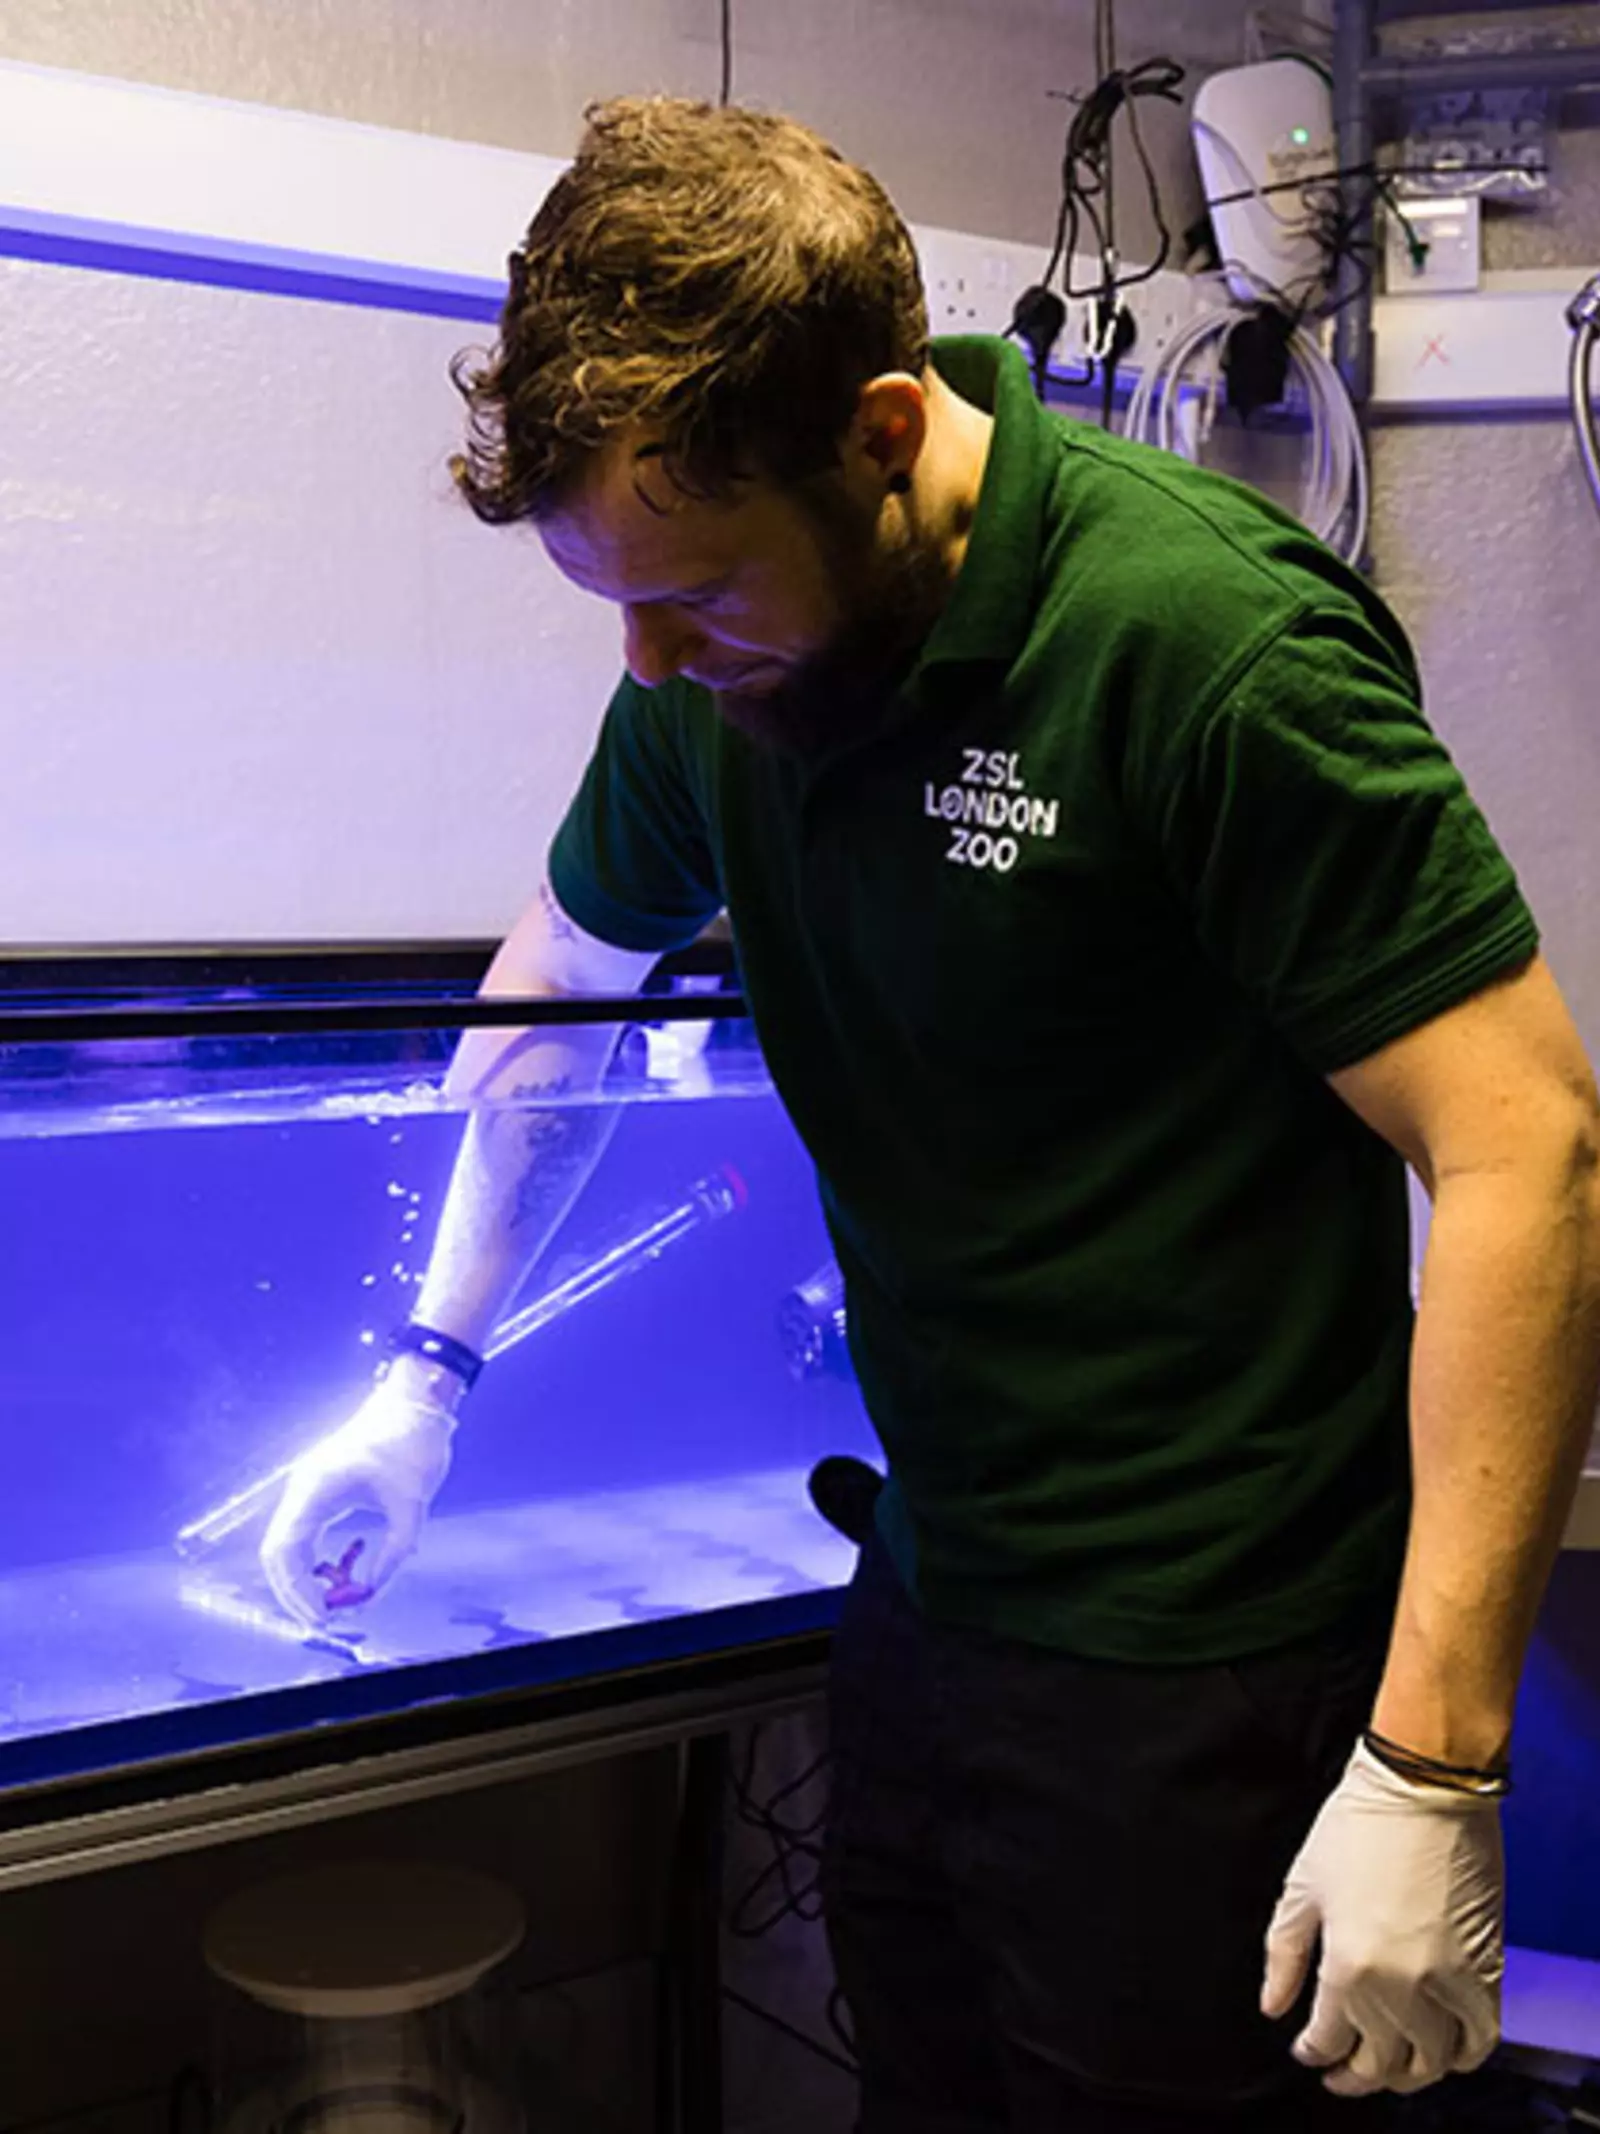 Aquarist Jeremy SImmons works in coral conservation breeding room behind the scenes at Tiny Giants London Zoo